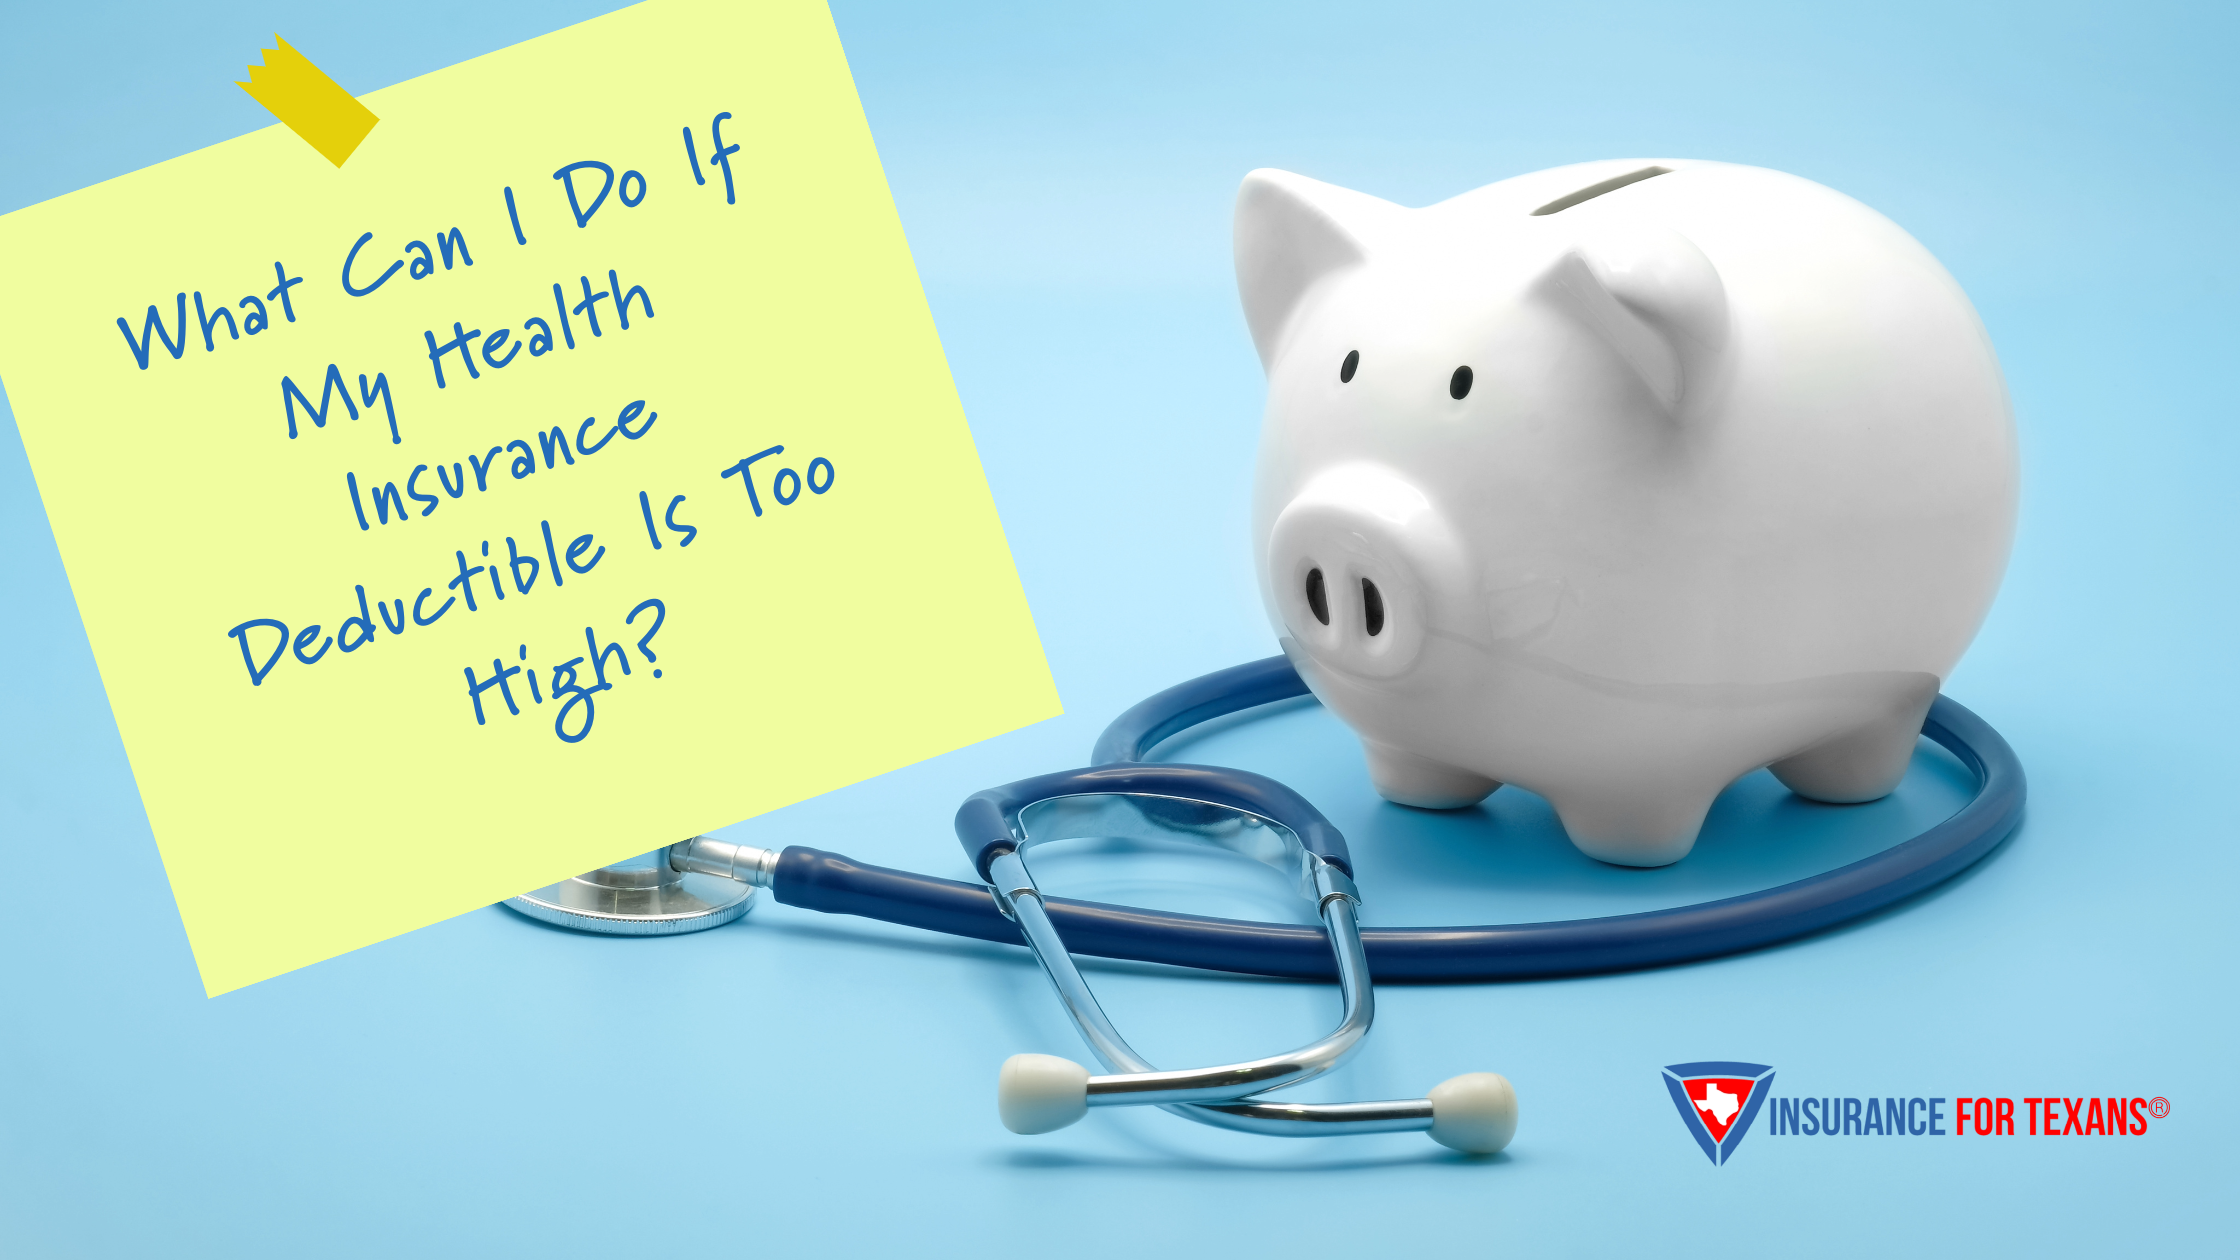 What Can I Do If My Health Insurance Deductible Is Too High?